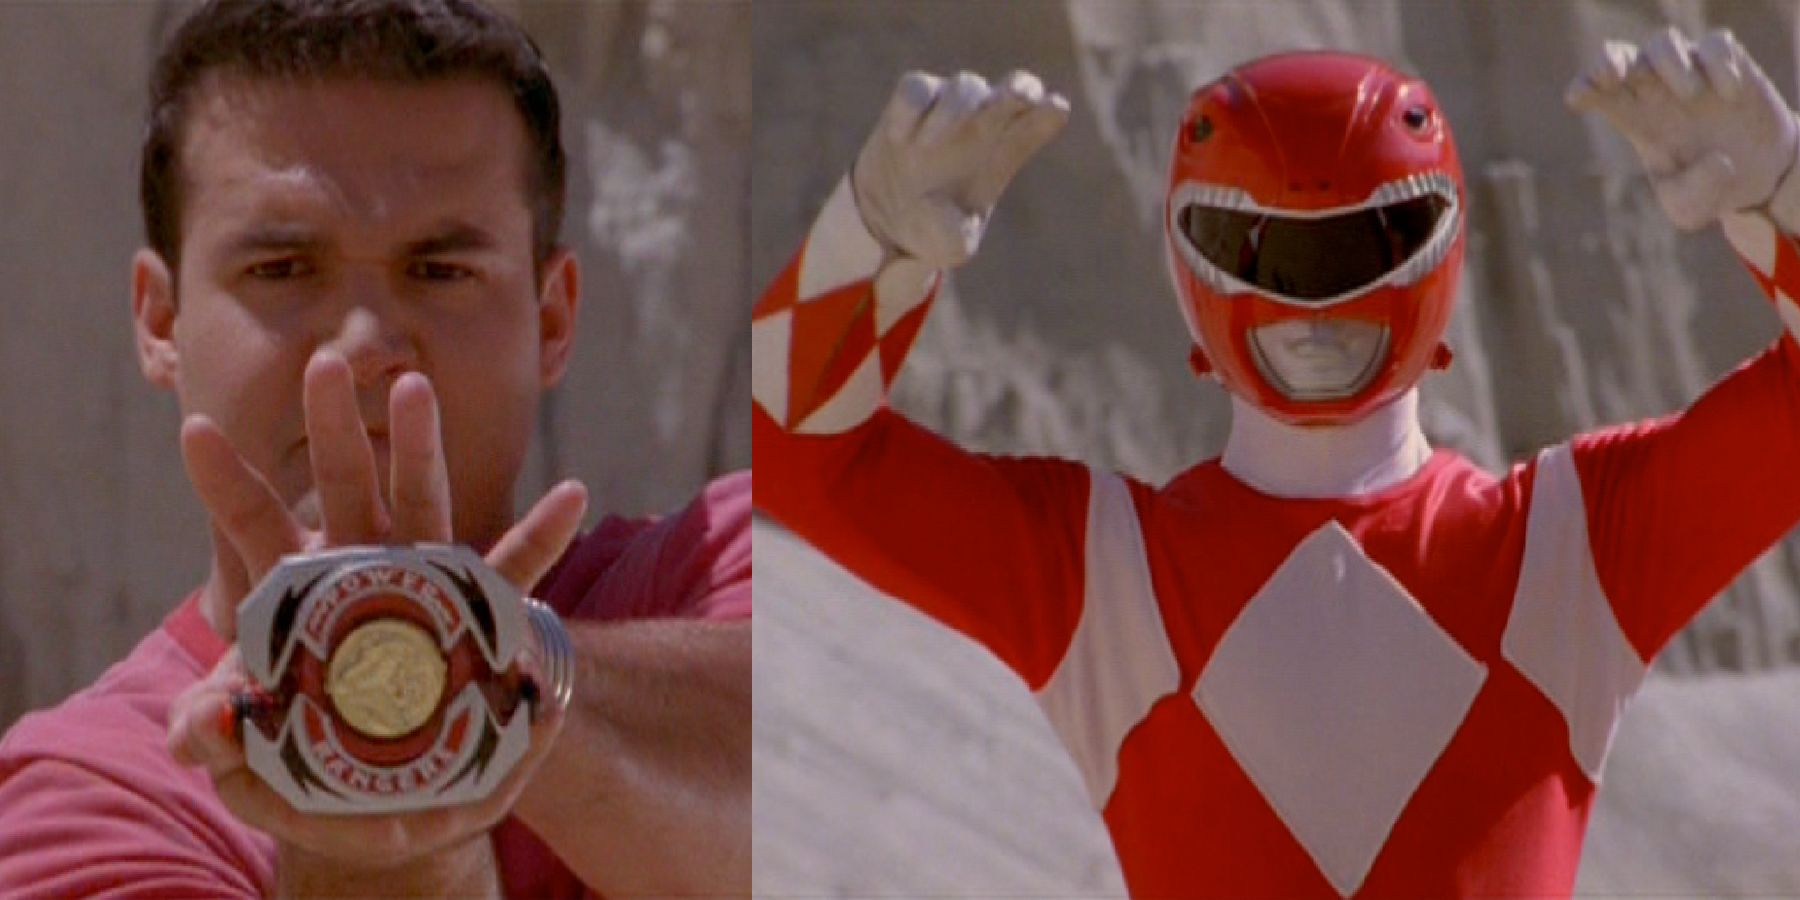 Power Rangers Every Red Ranger Ranked From Worst To Best